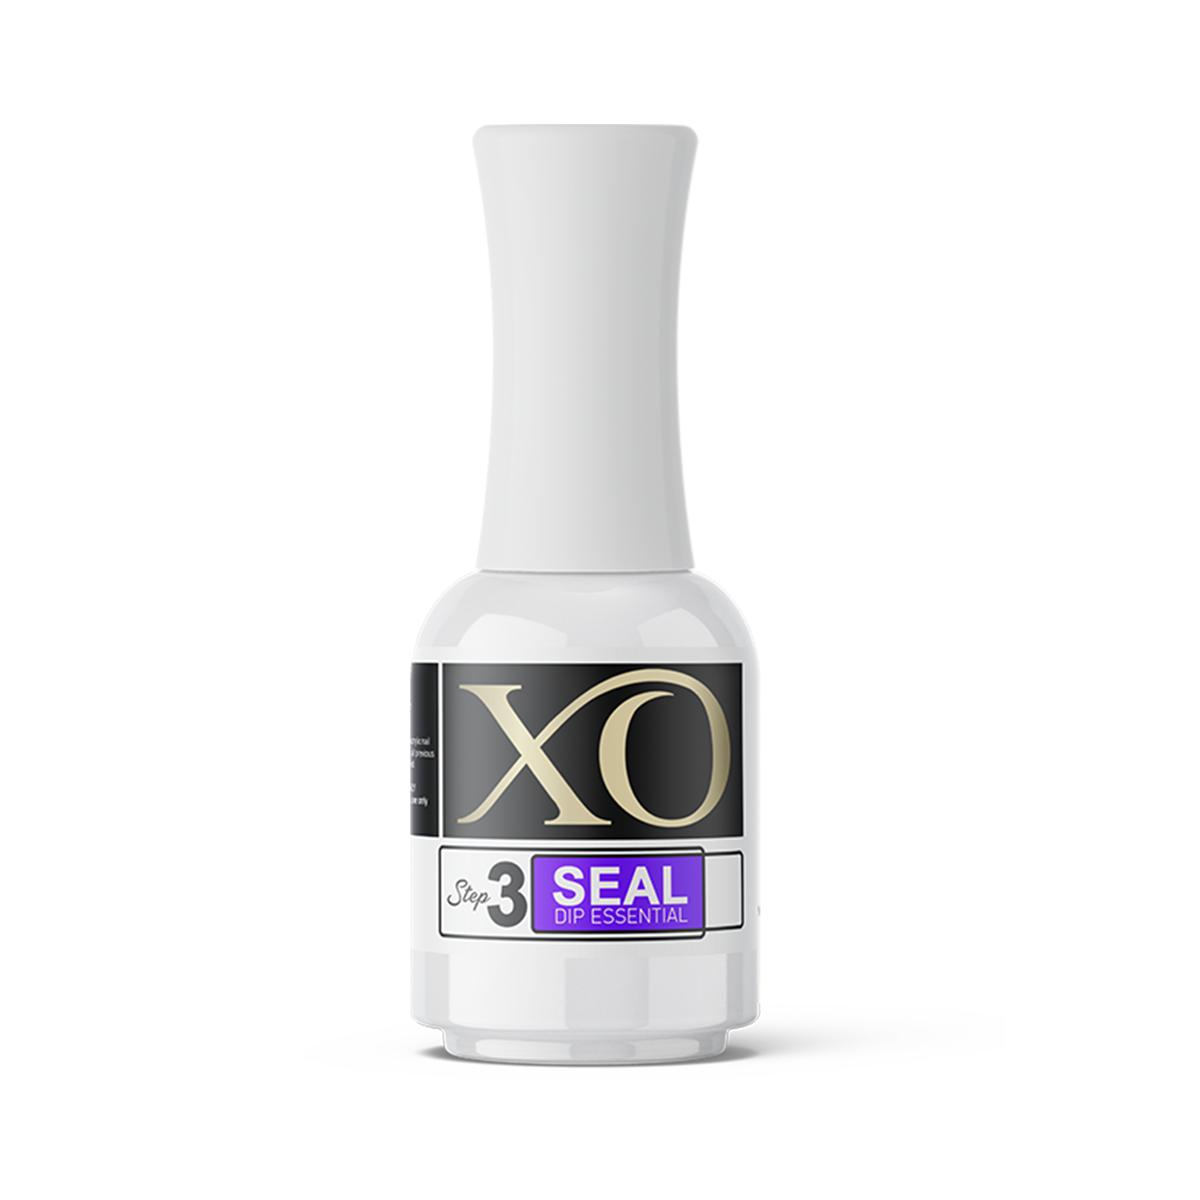 XO Dipping Essential - Seal Dip (0.5oz/15ml) for Dipping Manicures-Nails Deal & Beauty Supply- Nail Supply American Gel Polish - Phuong Ni